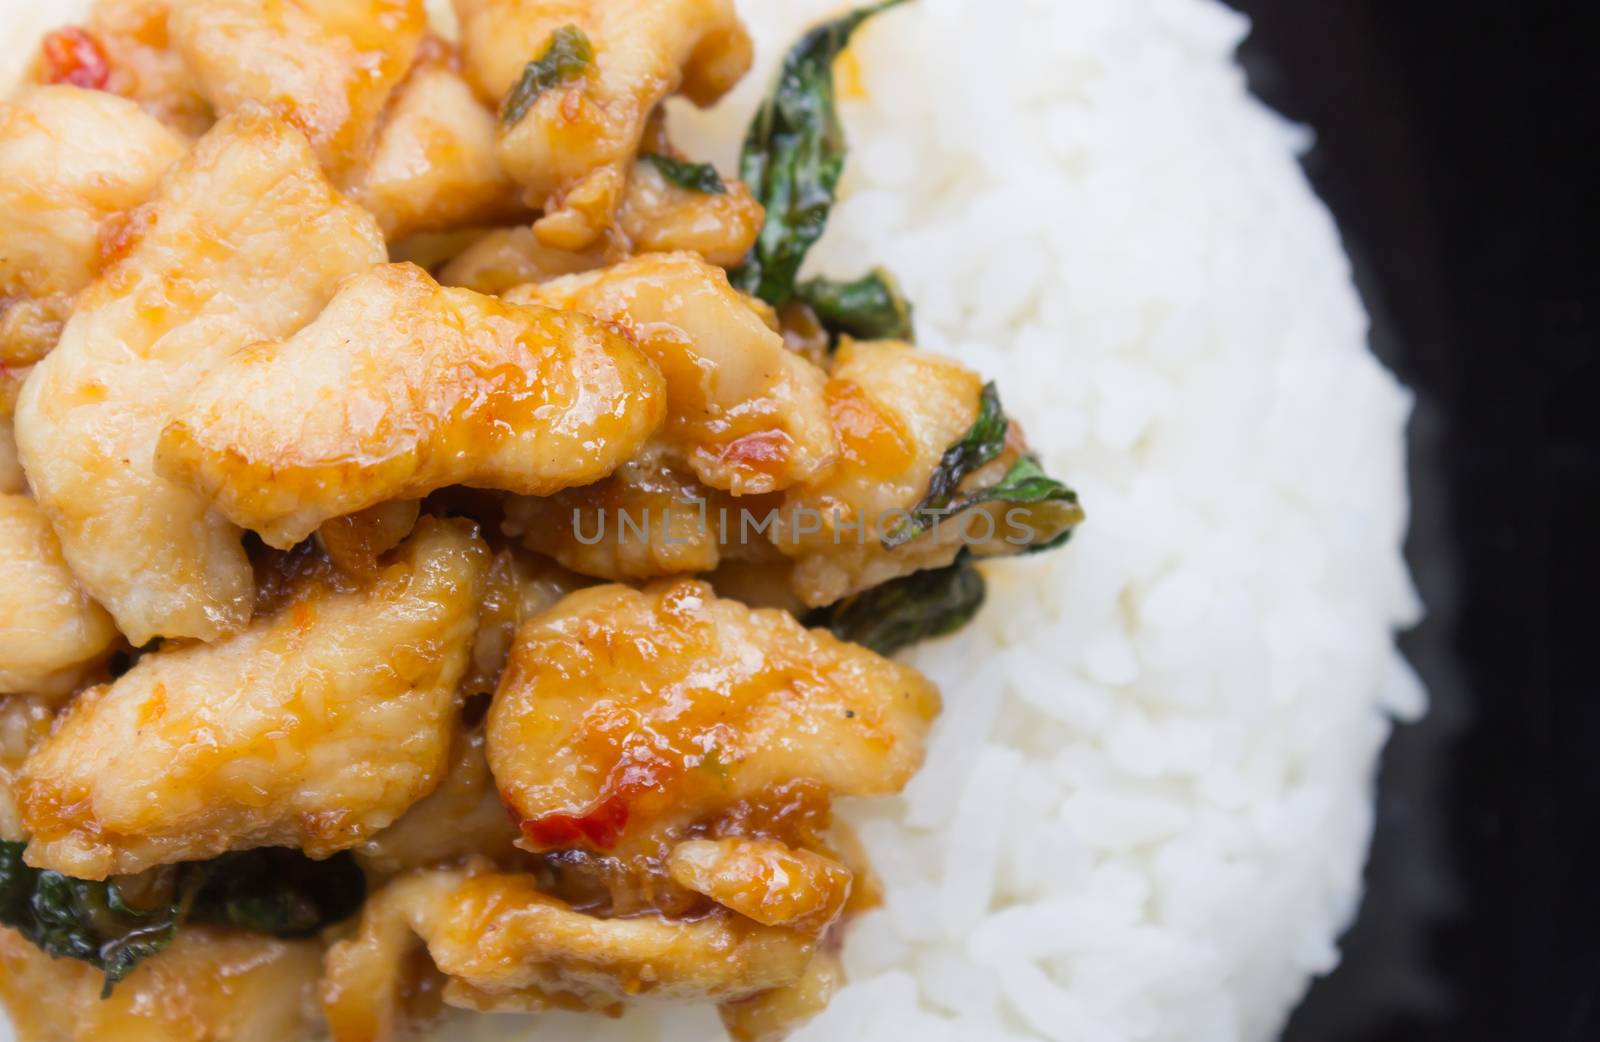 Stir-Fried Chicken and Holy Basil on Rice or Thai Food Recipe Fl by steafpong